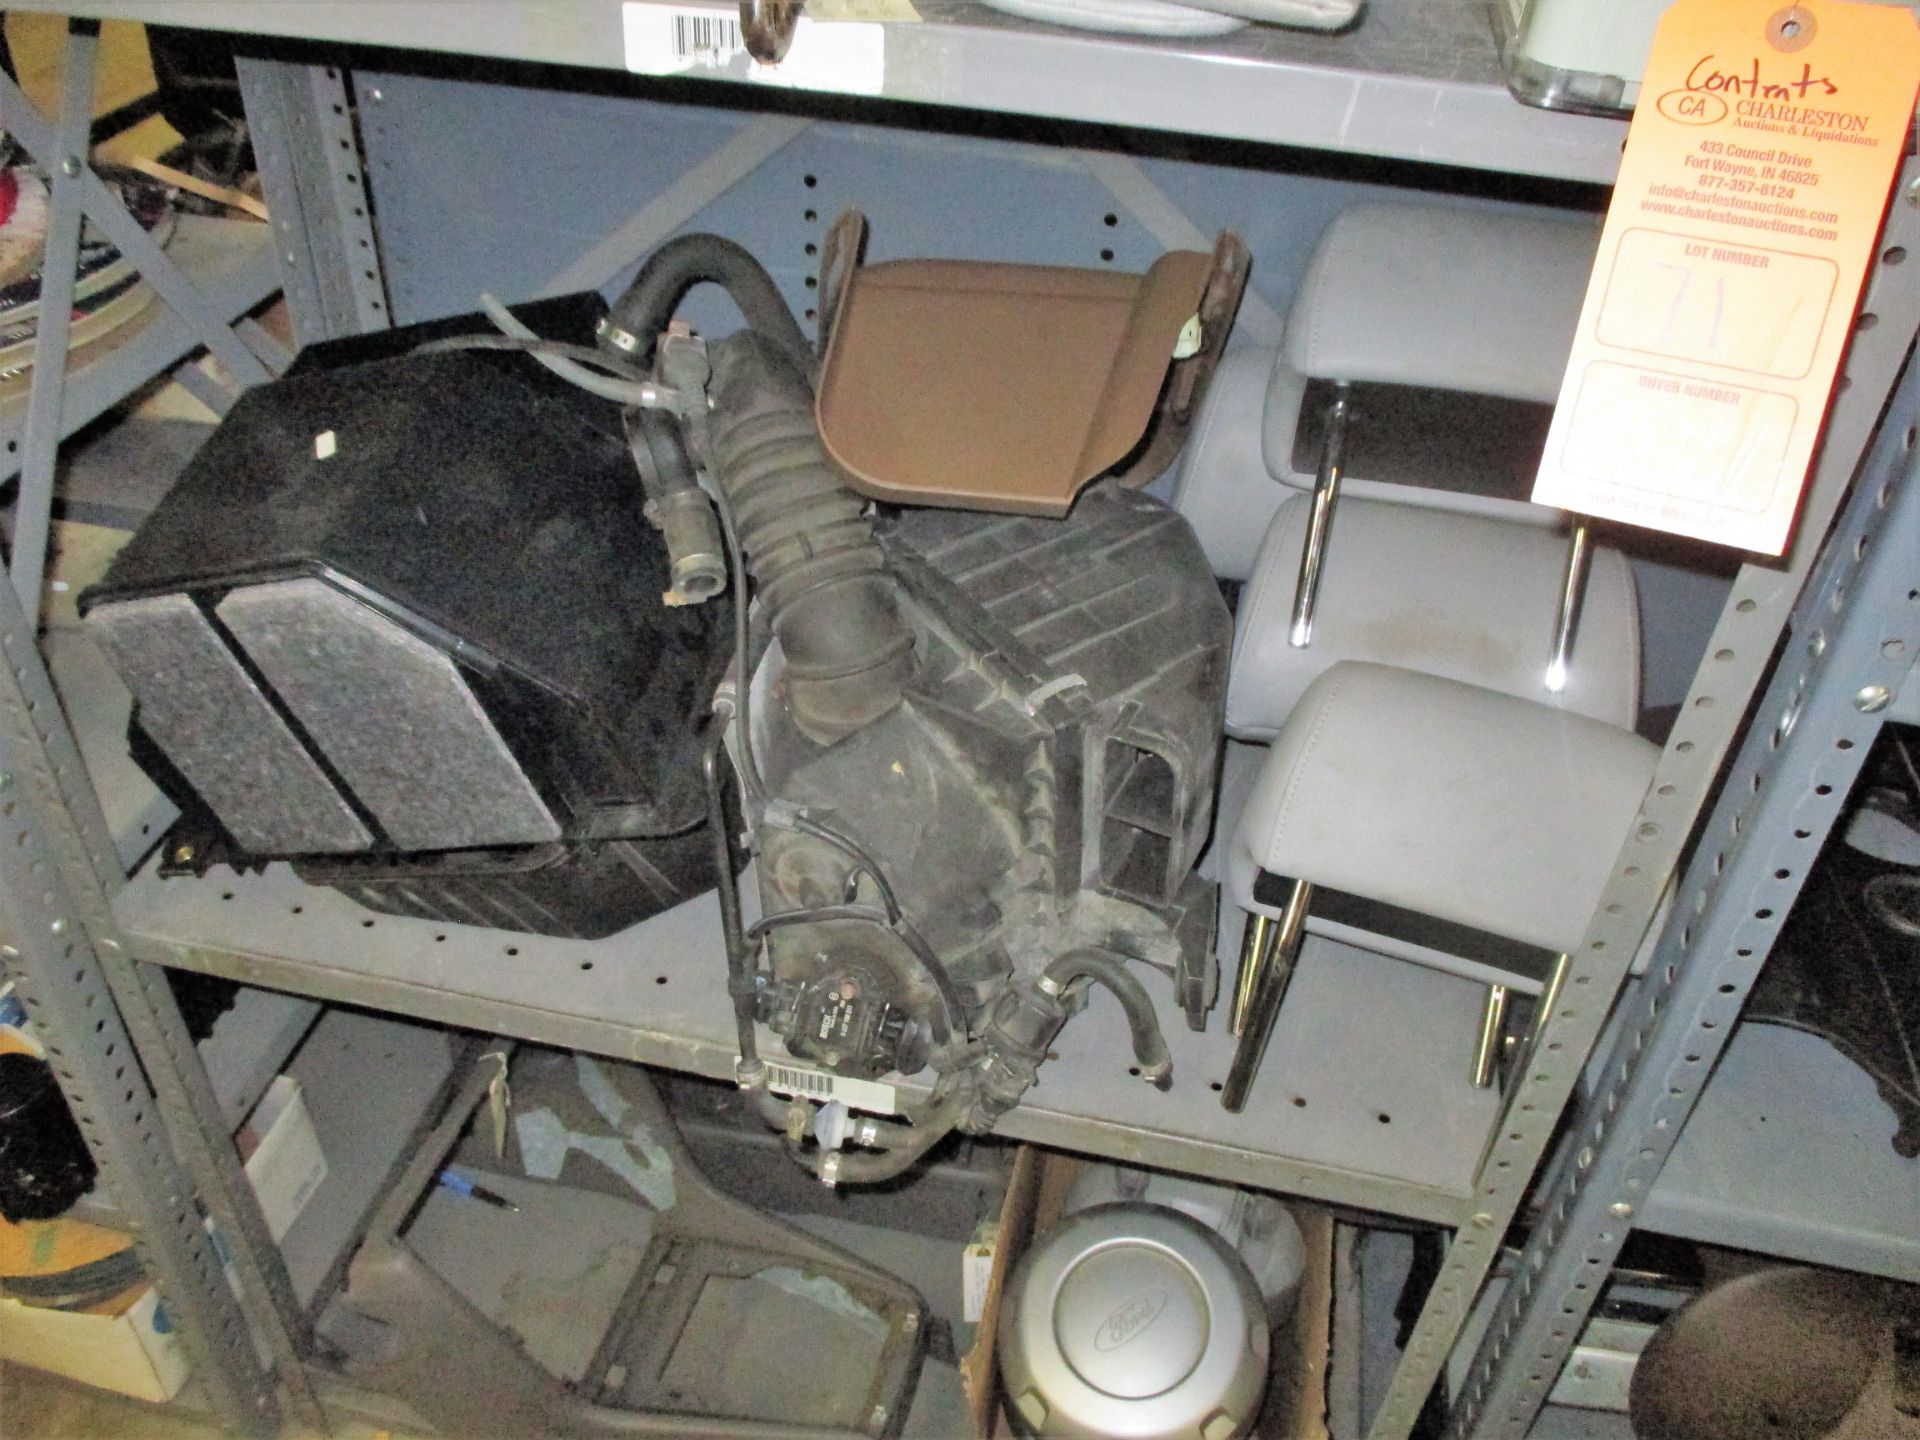 CONTENTS OF SHELF INCLUDING VARIOUS CAR JACKS; HEAD REST; CONSOLE PARTS; FORD WHEEL CAPS & MORE - Image 2 of 2